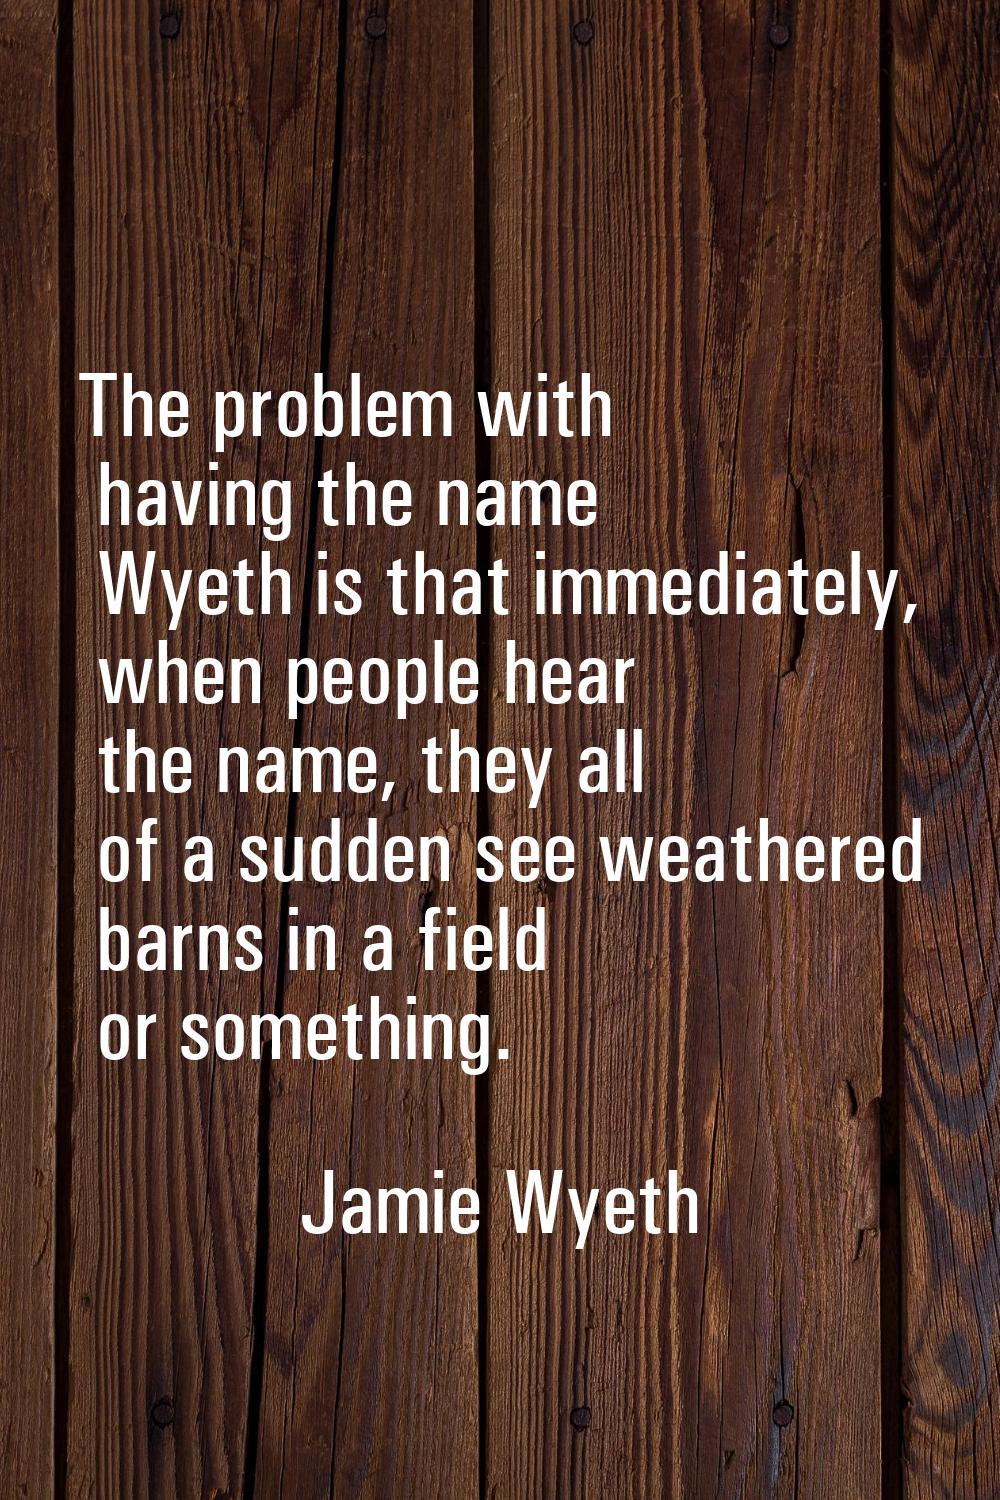 The problem with having the name Wyeth is that immediately, when people hear the name, they all of 